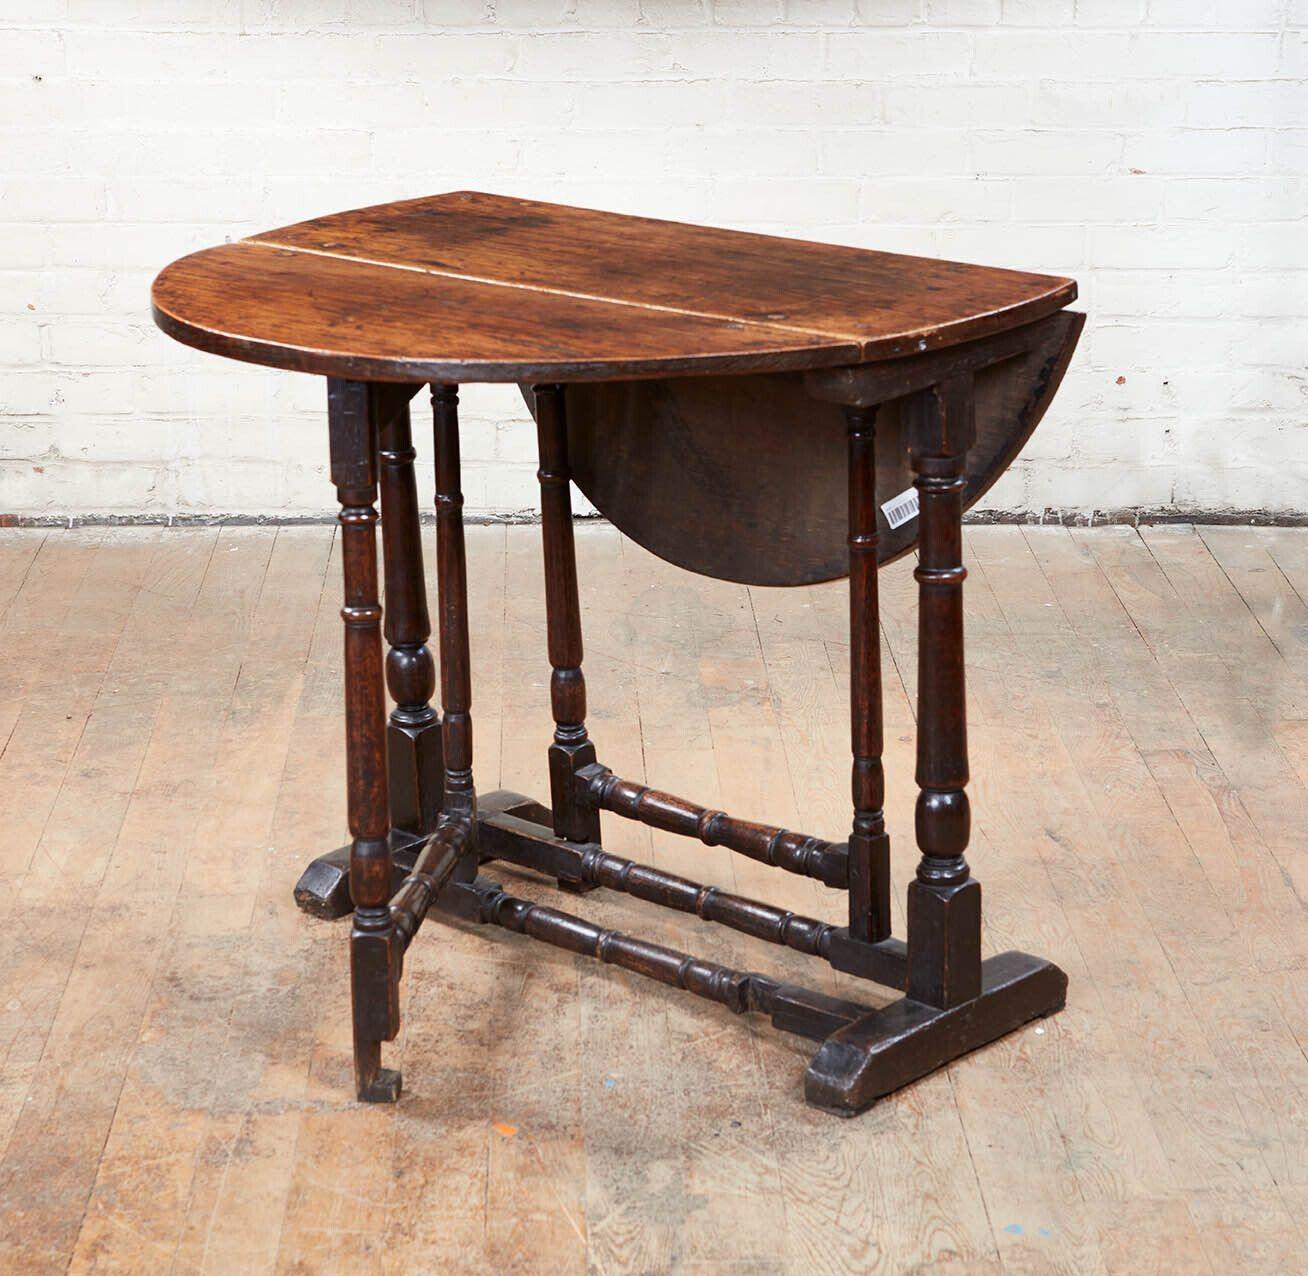 18th Century Small Oval Gateleg Table For Sale